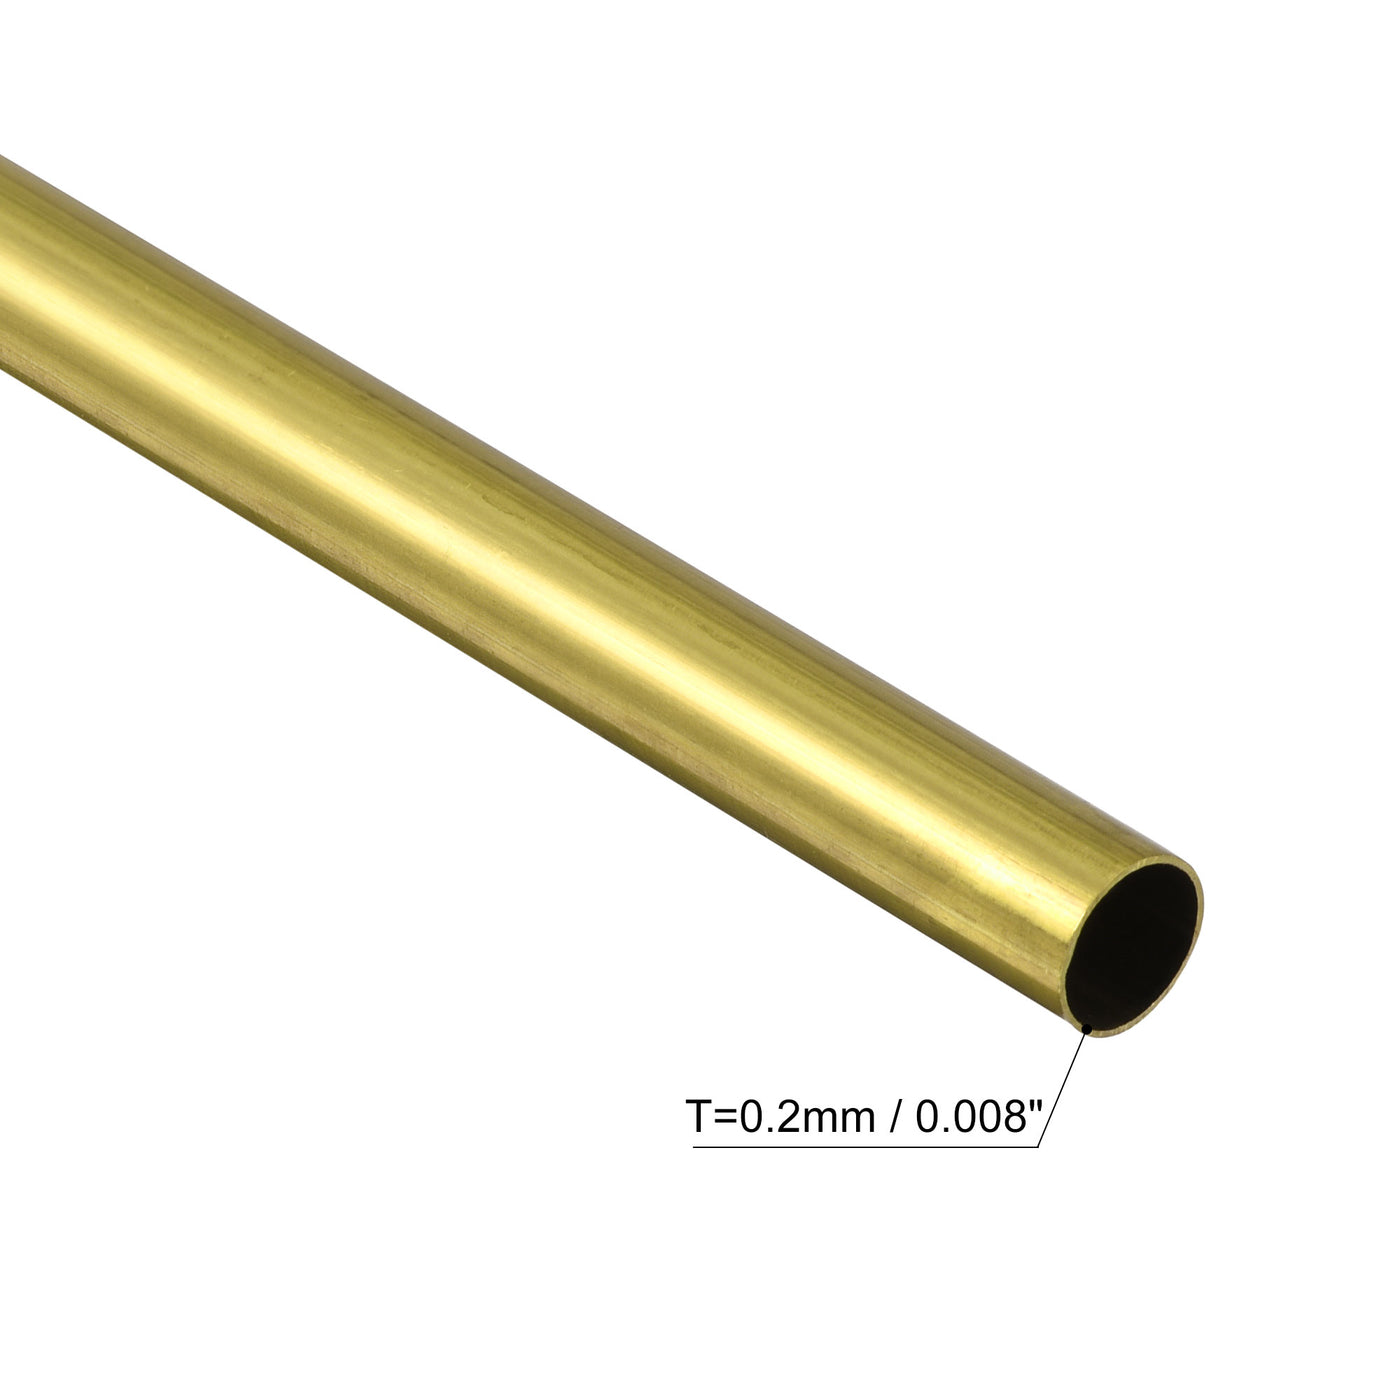 uxcell Uxcell 3Pcs 7mm x 0.2mm x 400mm Seamless Straight Brass Tube for Industry DIY Projects